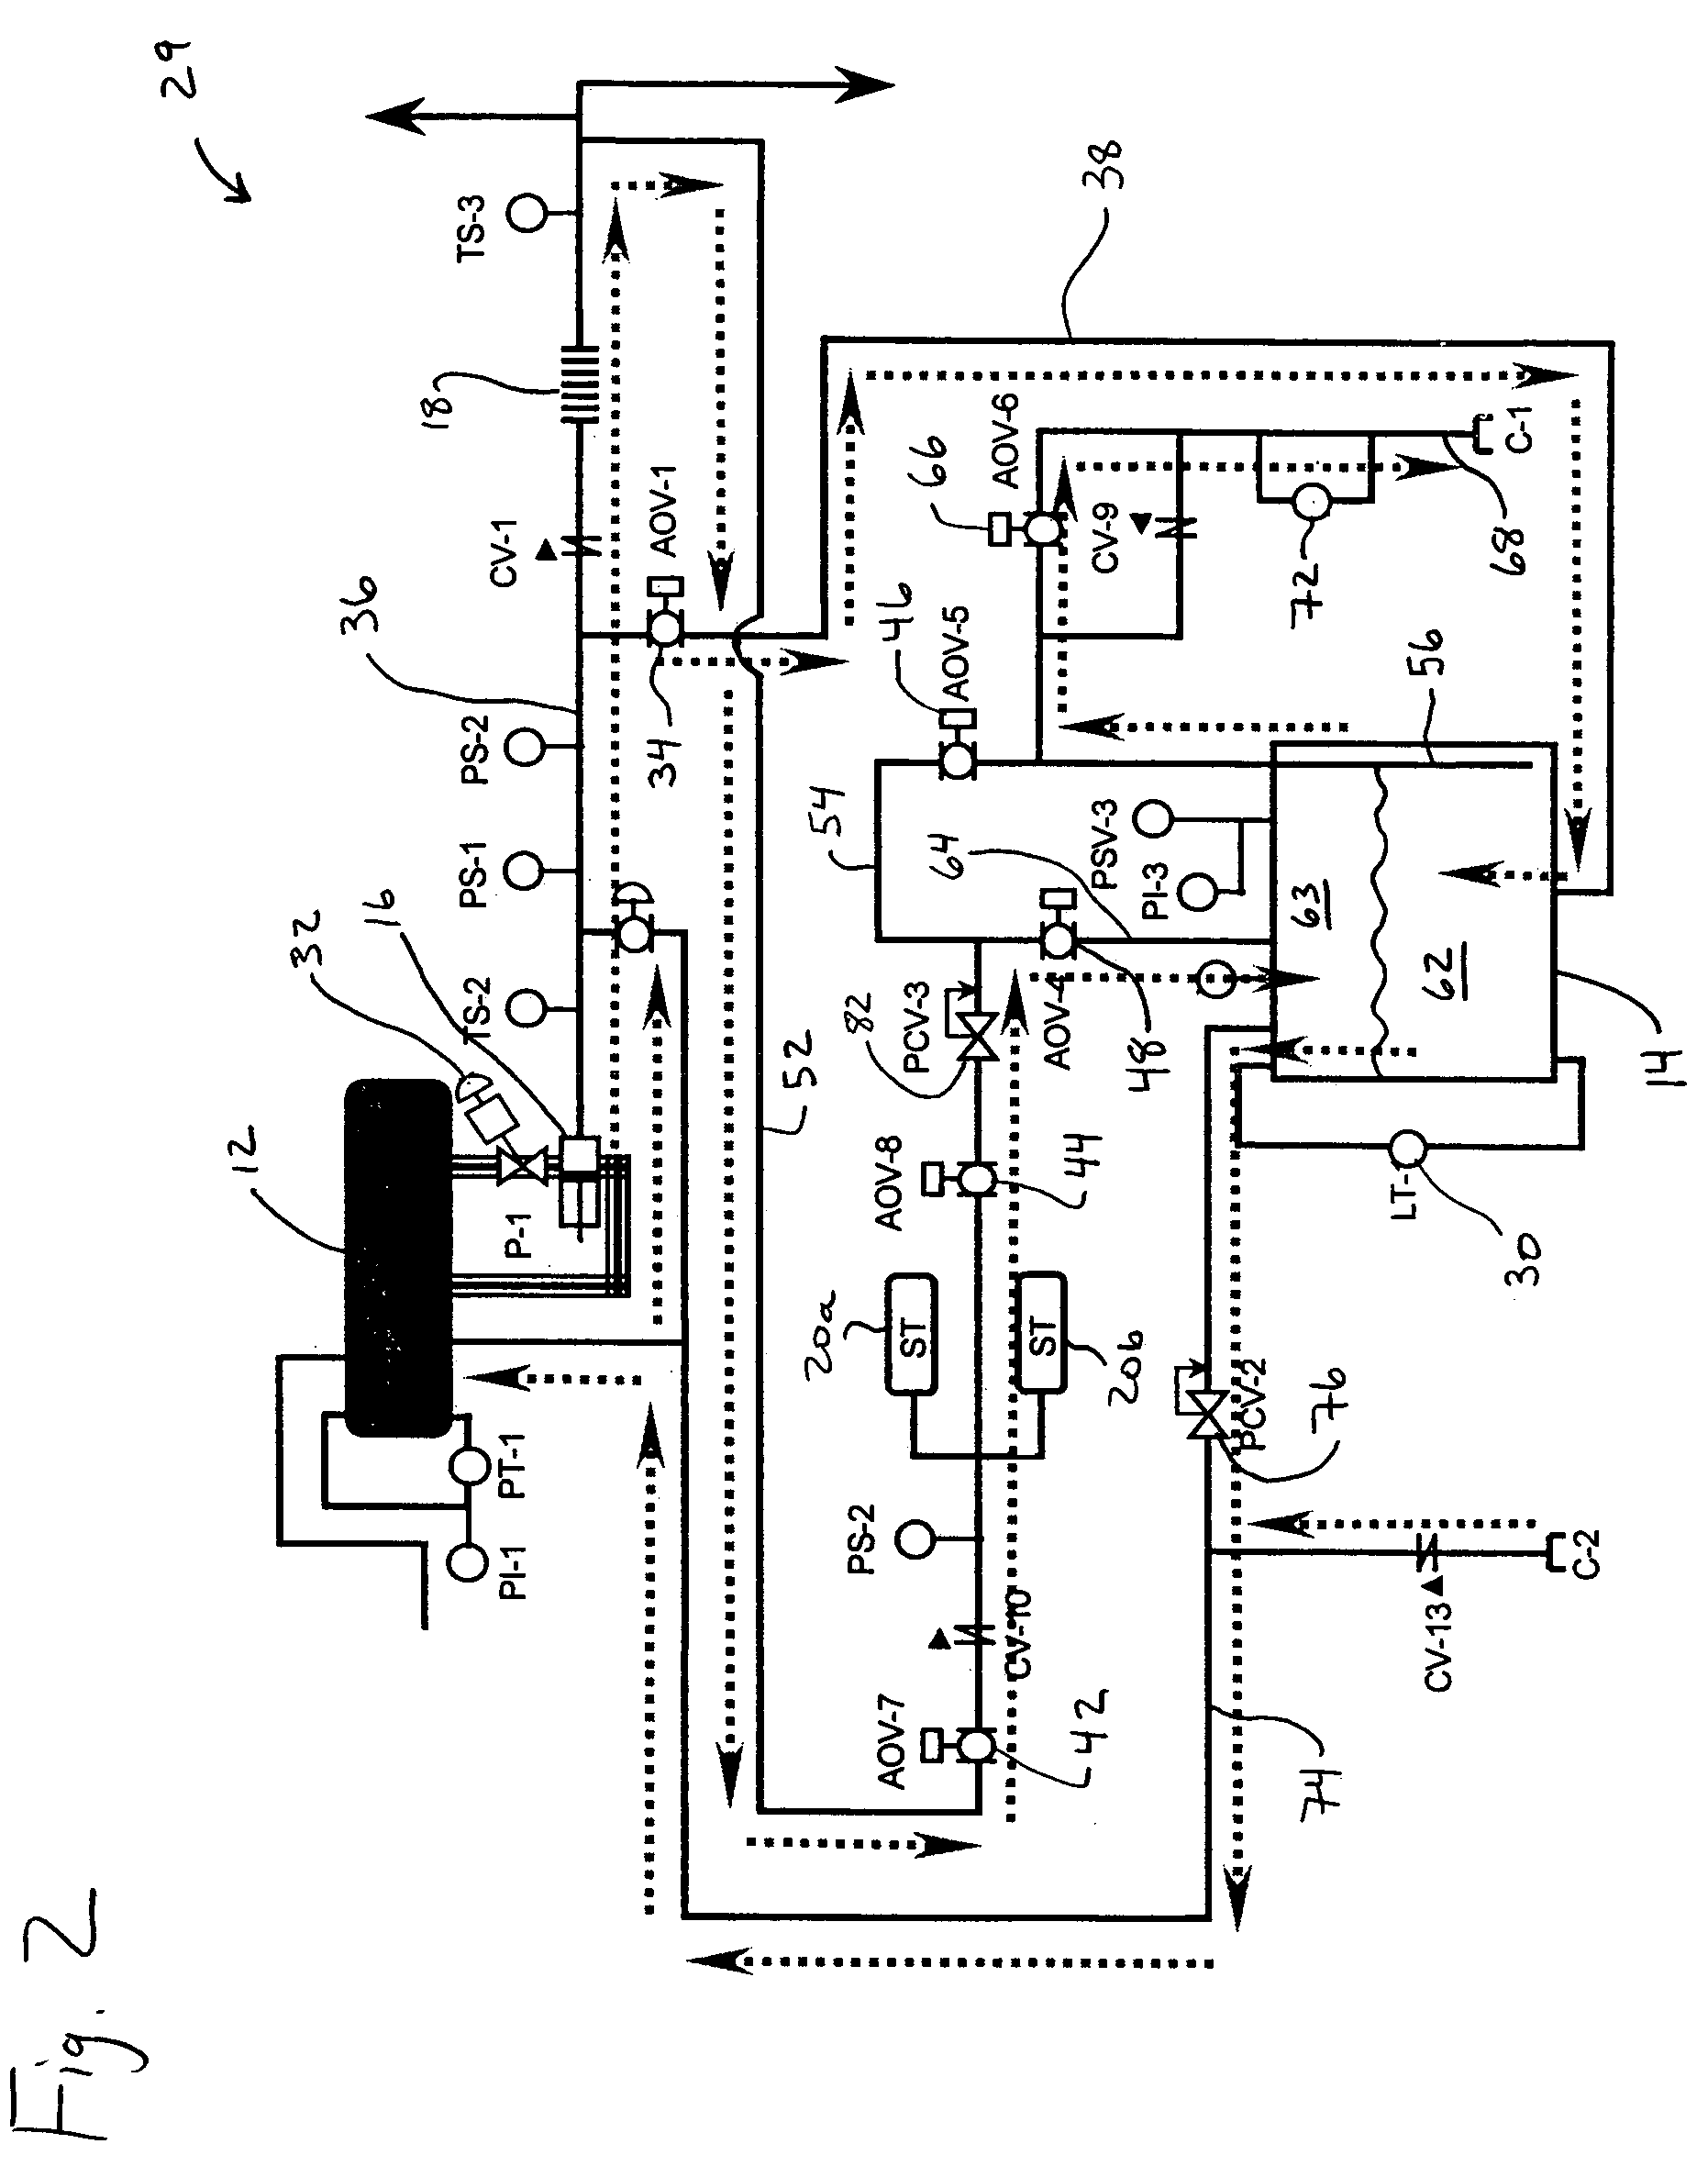 Liquid and compressed natural gas dispensing system